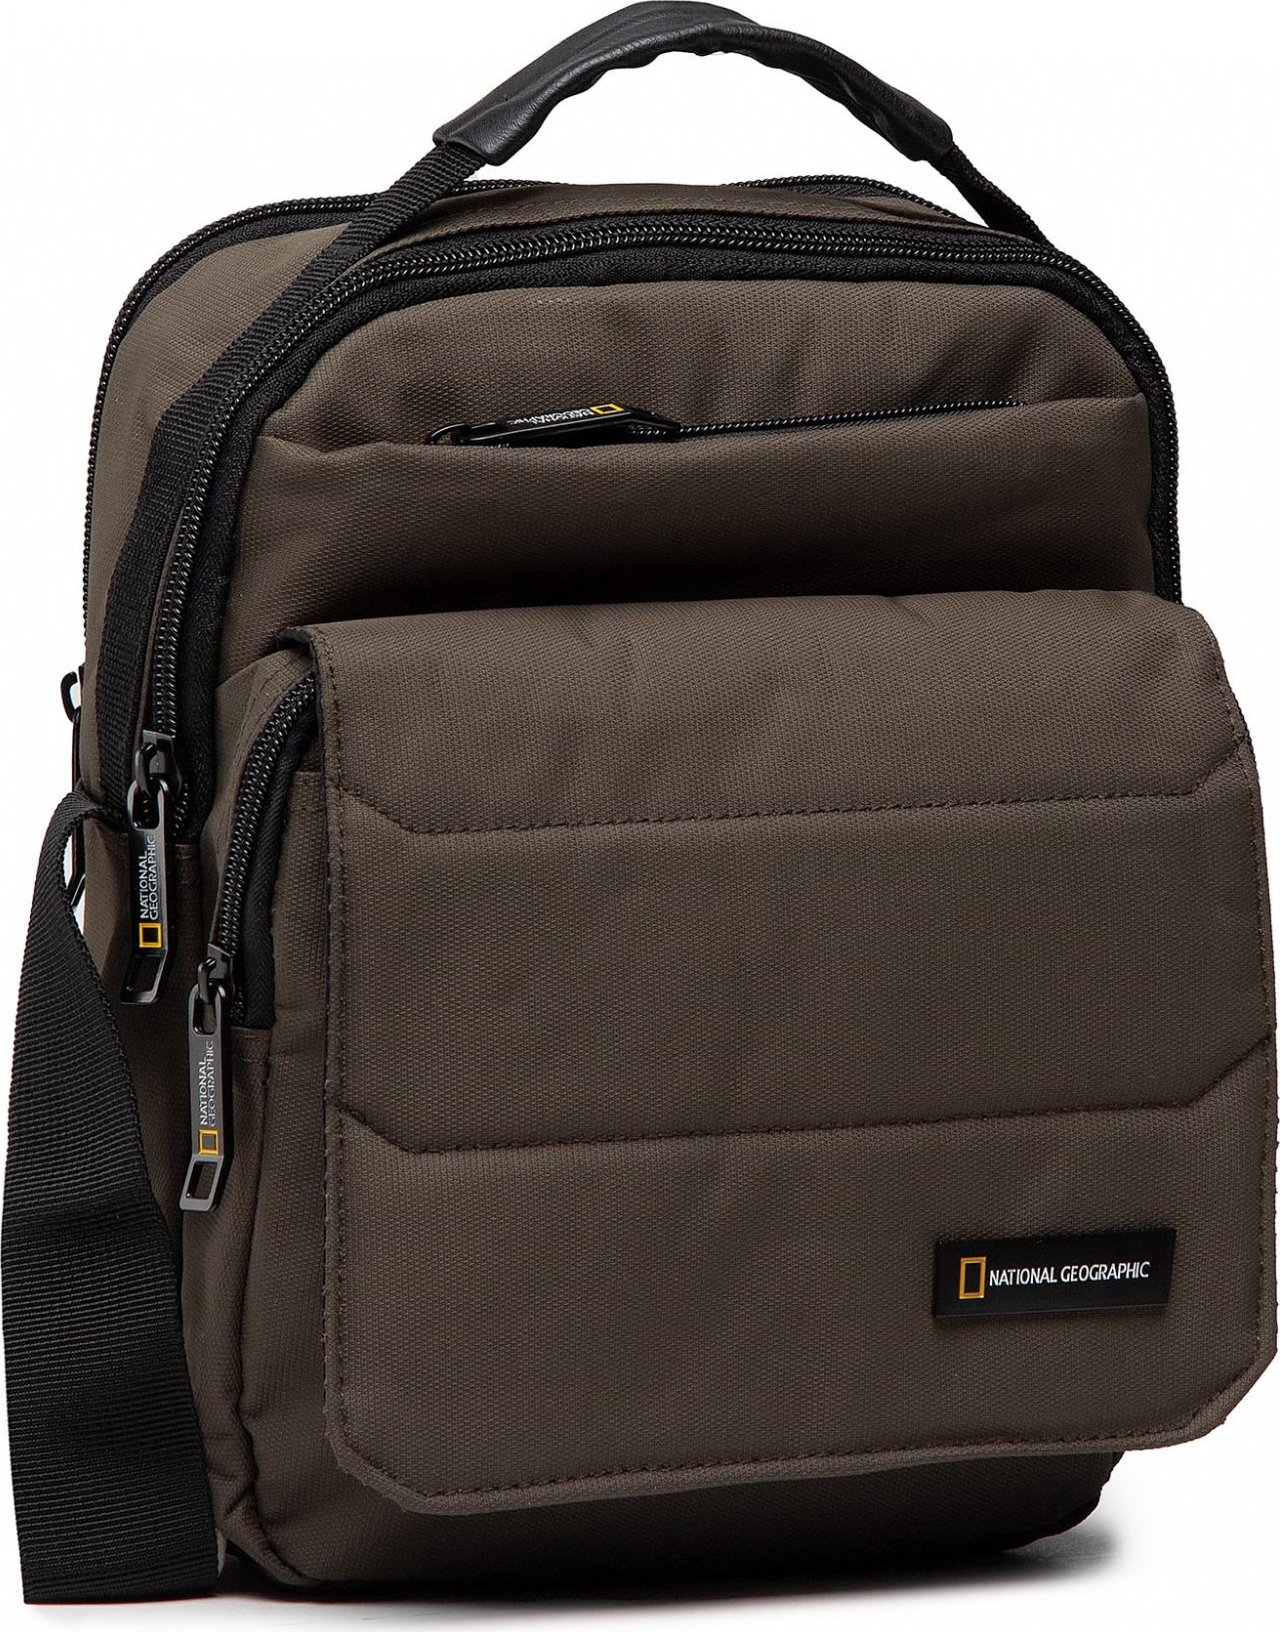 National Geographic Utility Bag N00704.11